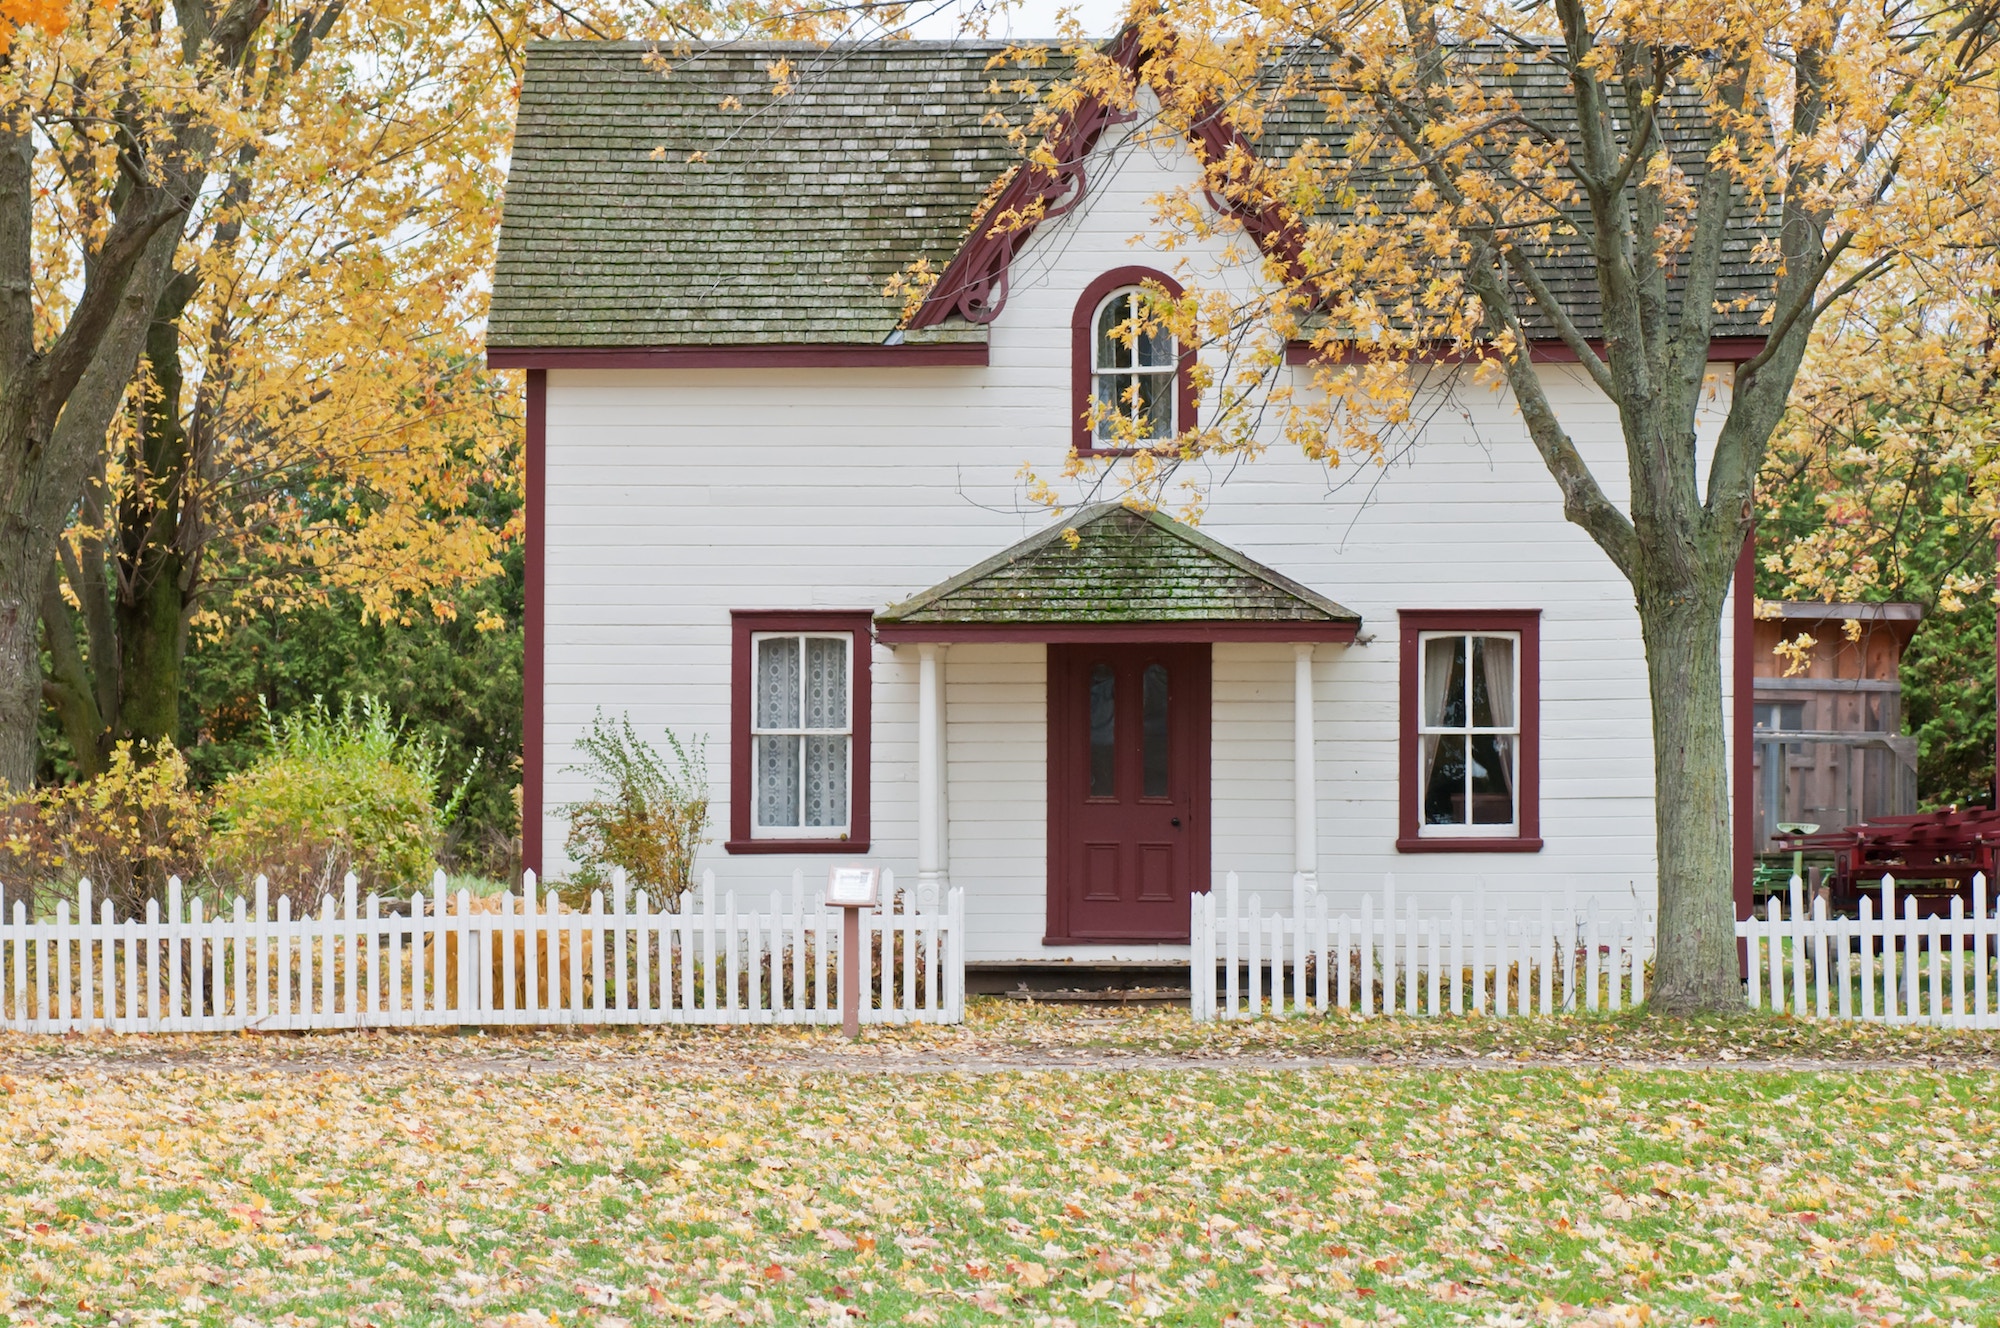 Autumn leaves fall down in front of a modestly-sized white home with red trim and a green roof, surrounded by a white picket fence